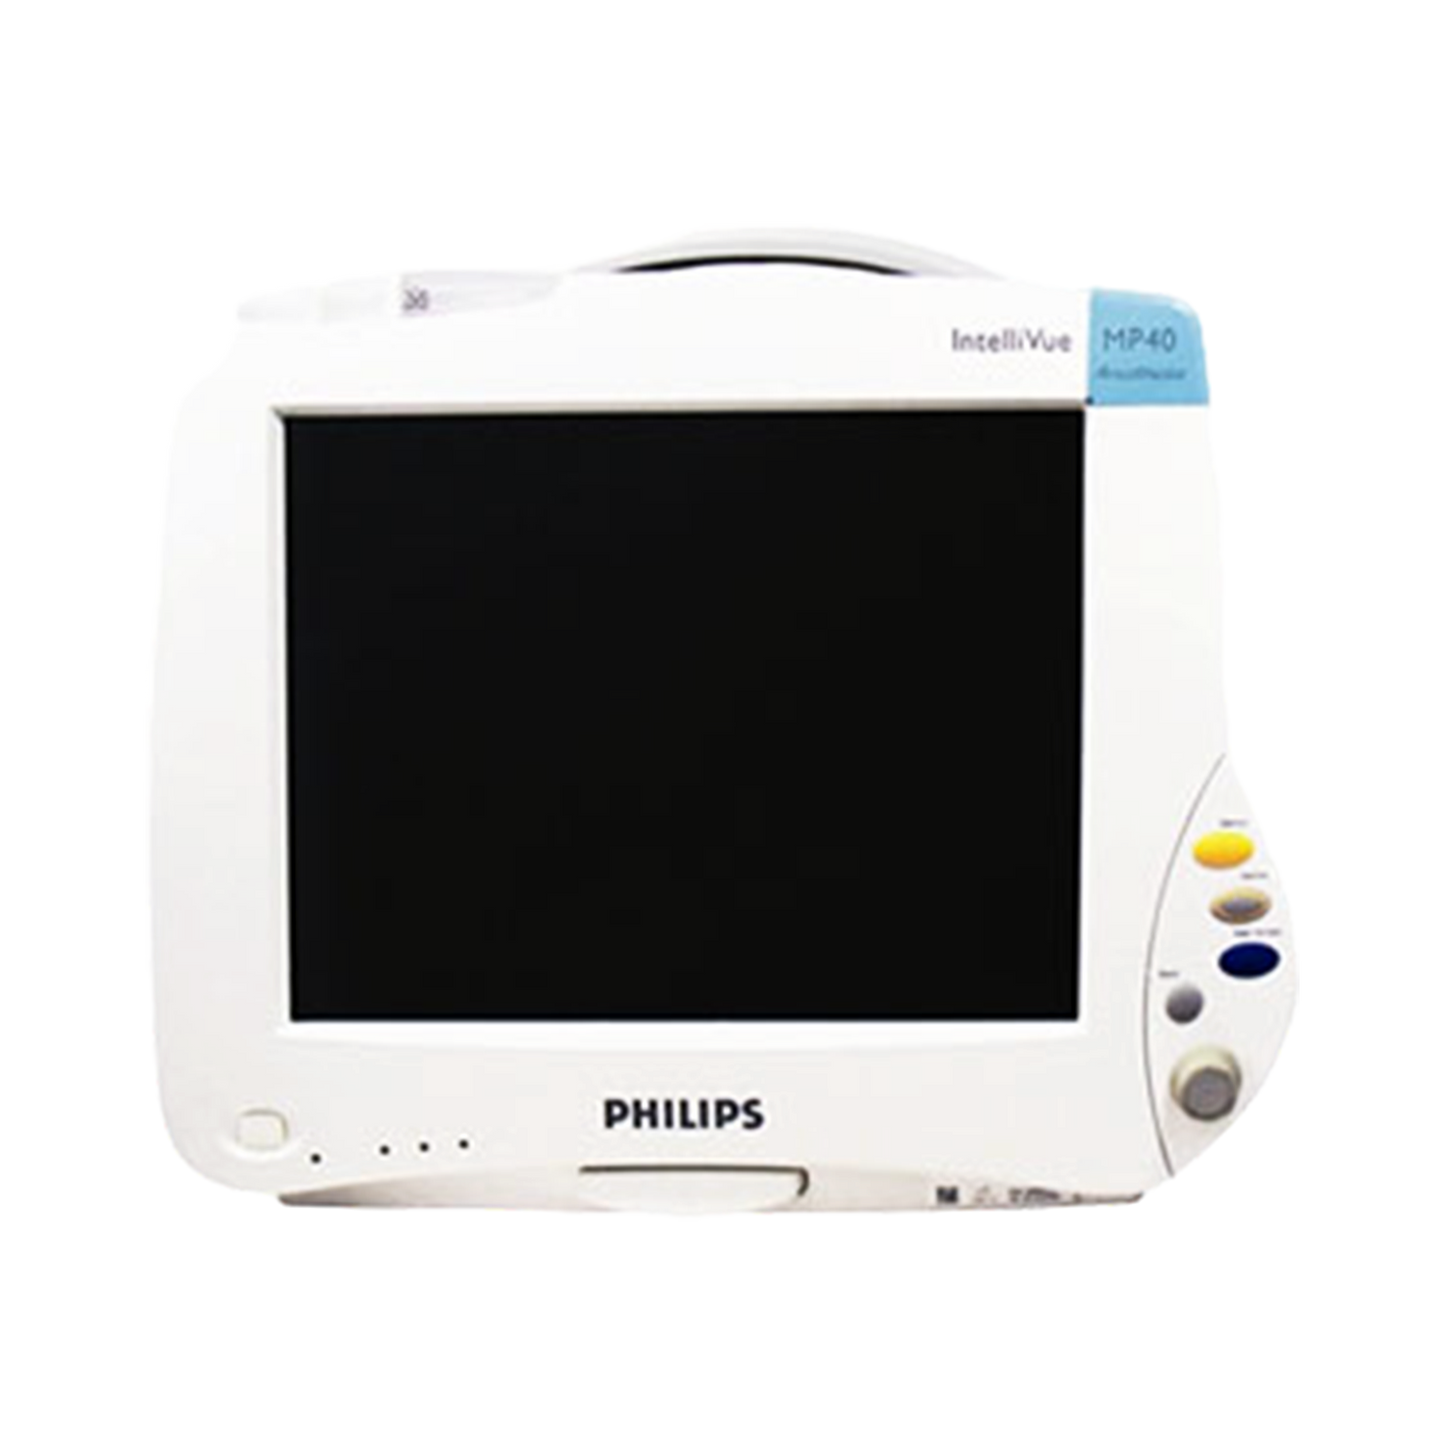 Philips Intellivue MP40 M8003A Patient Monitor